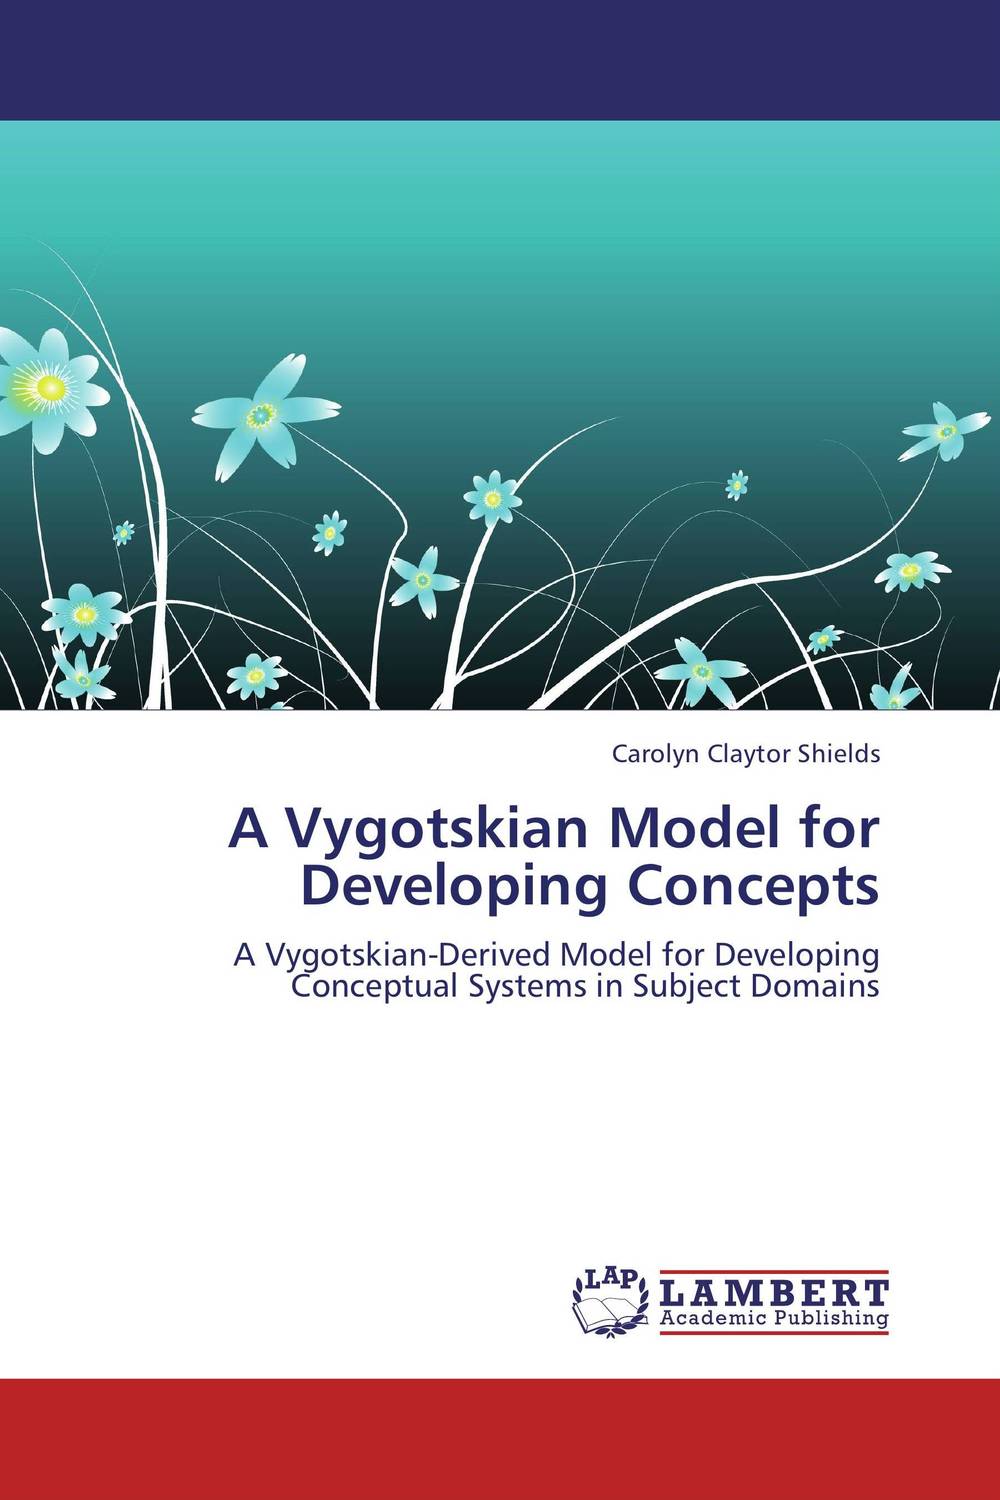 A Vygotskian Model for Developing Concepts